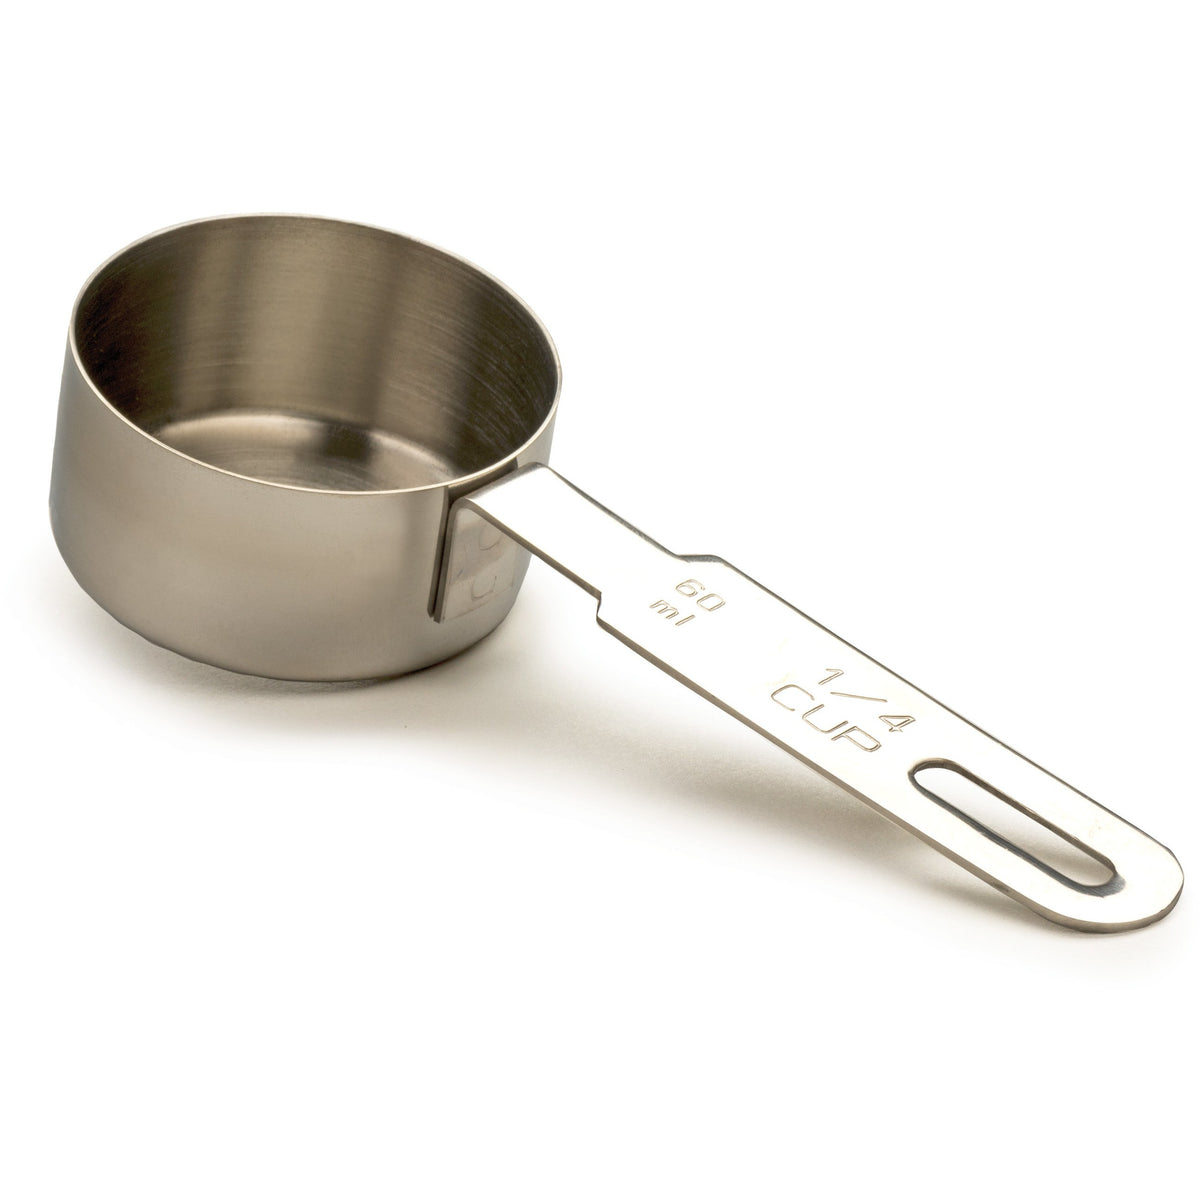 1/4 Cup Measuring Cup